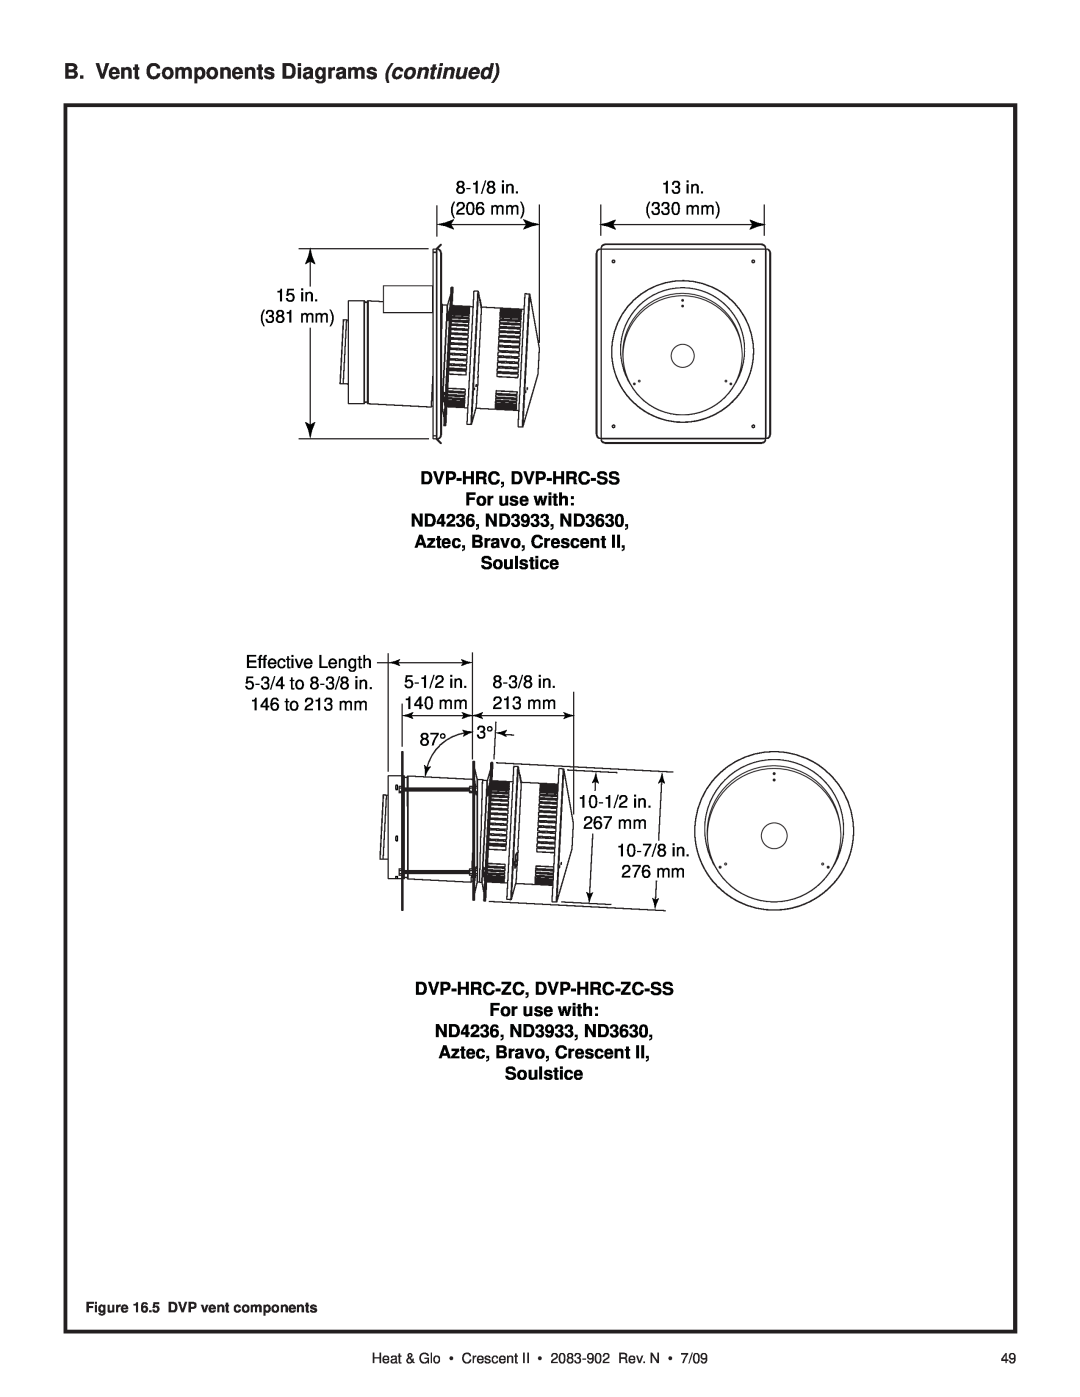 Heat & Glo LifeStyle CRESCENT II B. Vent Components Diagrams continued, DVP-HRC, DVP-HRC-SS For use with, Soulstice 